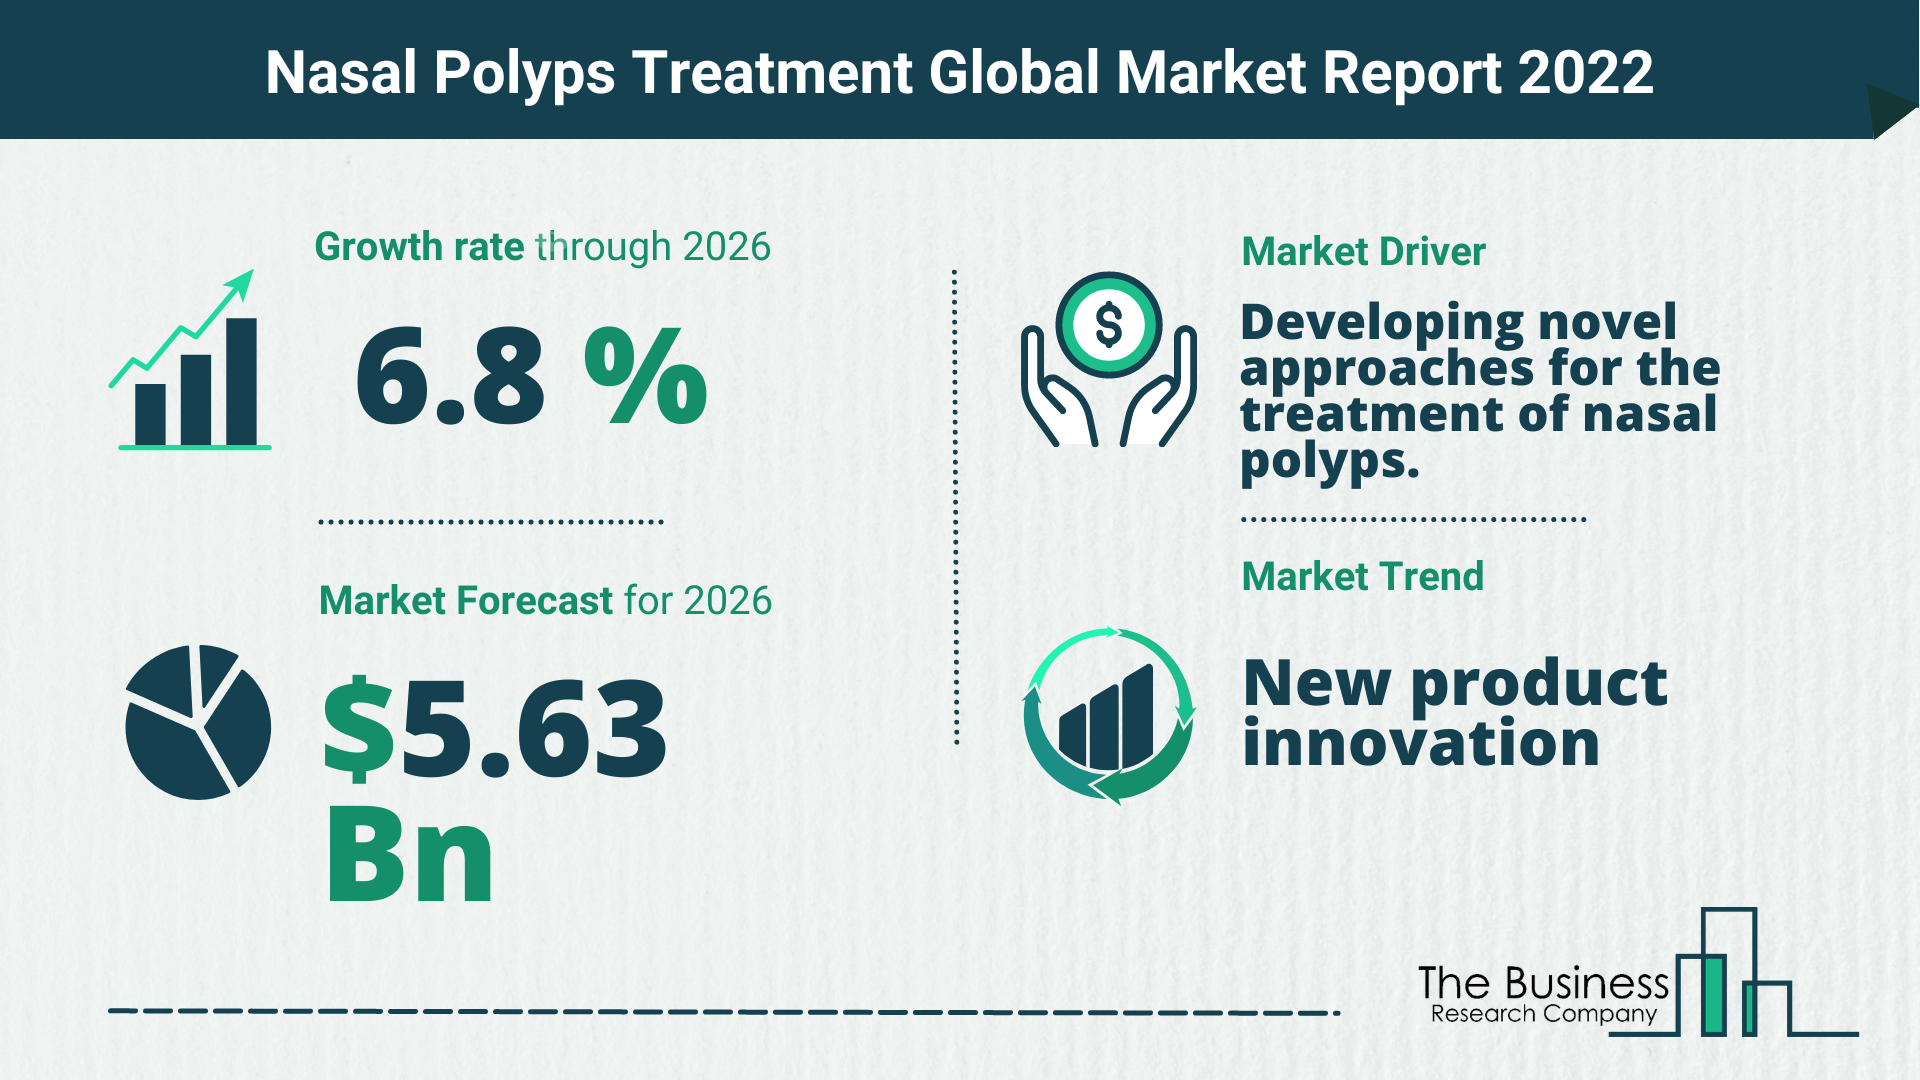 What Is The Nasal Polyps Treatment Market Overview In 2022?